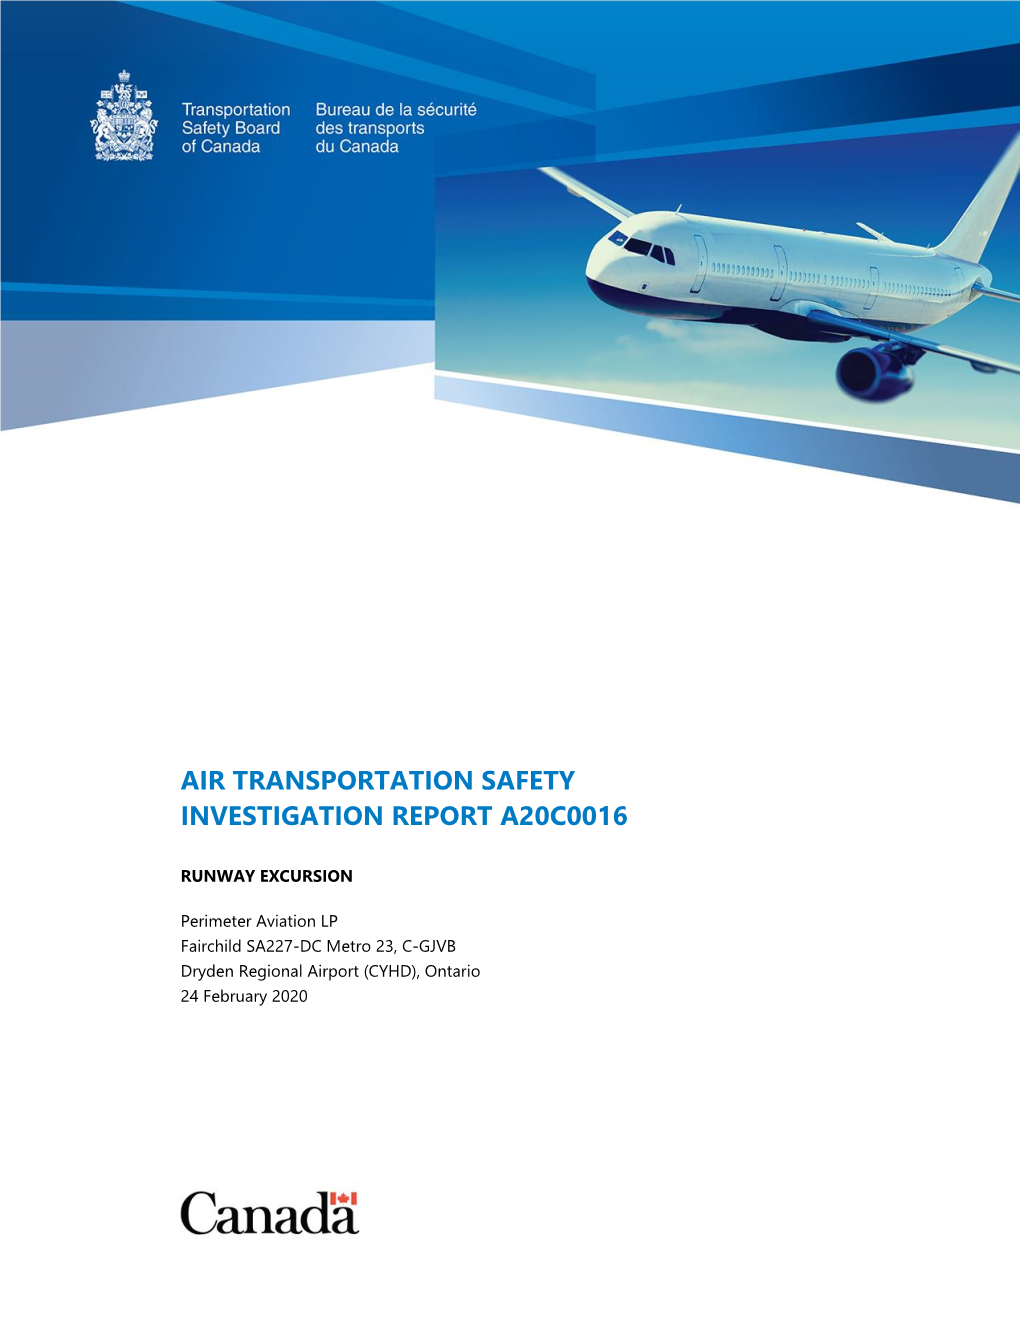 Air Transportation Safety Investigation Report A20c0016